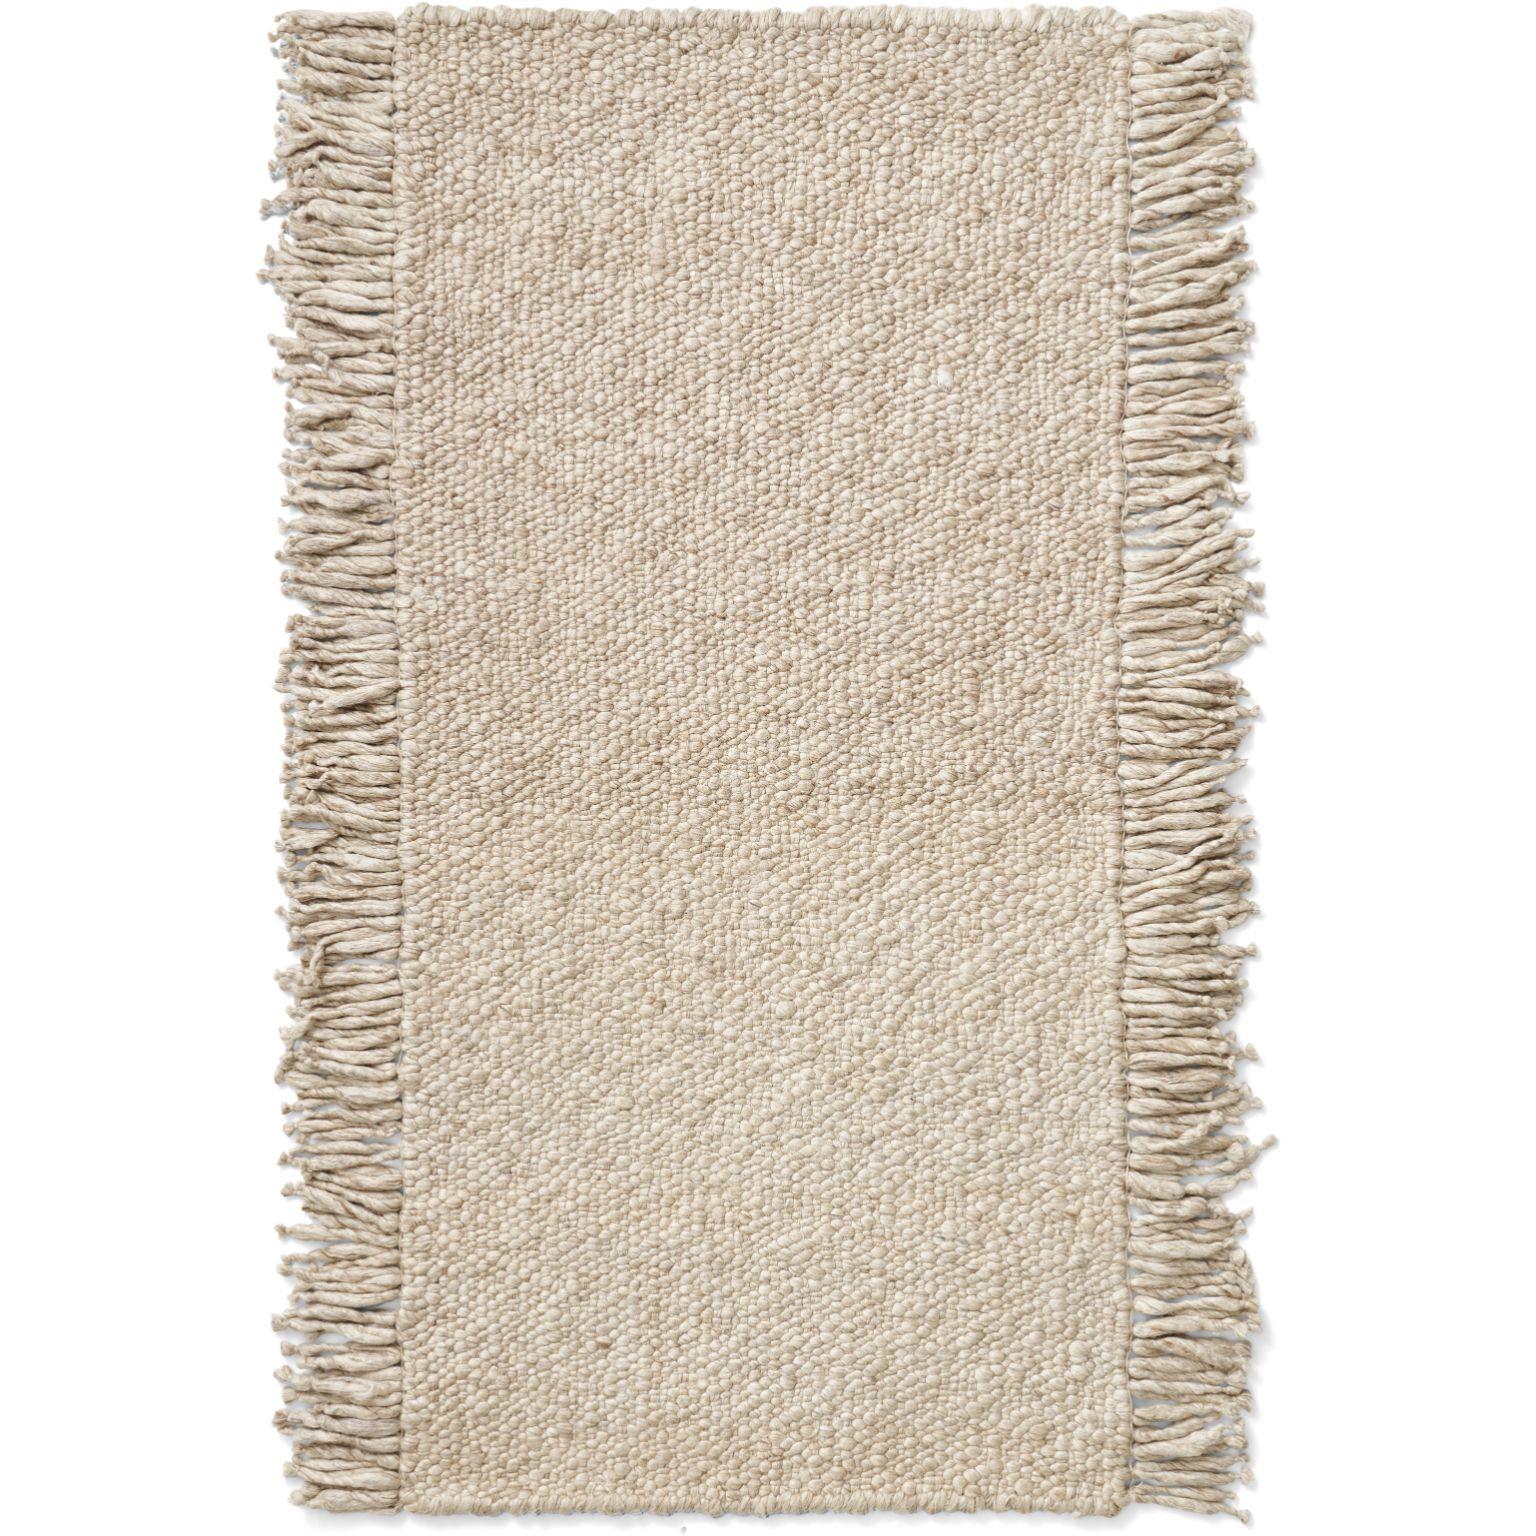 Colonnade no.03 Rug by Cappelen Dimyr
Dimensions: D100 x H240
Materials: 100% Wool

Colonnade no.03 is a heavy, compact, and rustic rug created in luxury chunky wool and woven in a classic basket weave construction. The bold and over-dimensioned